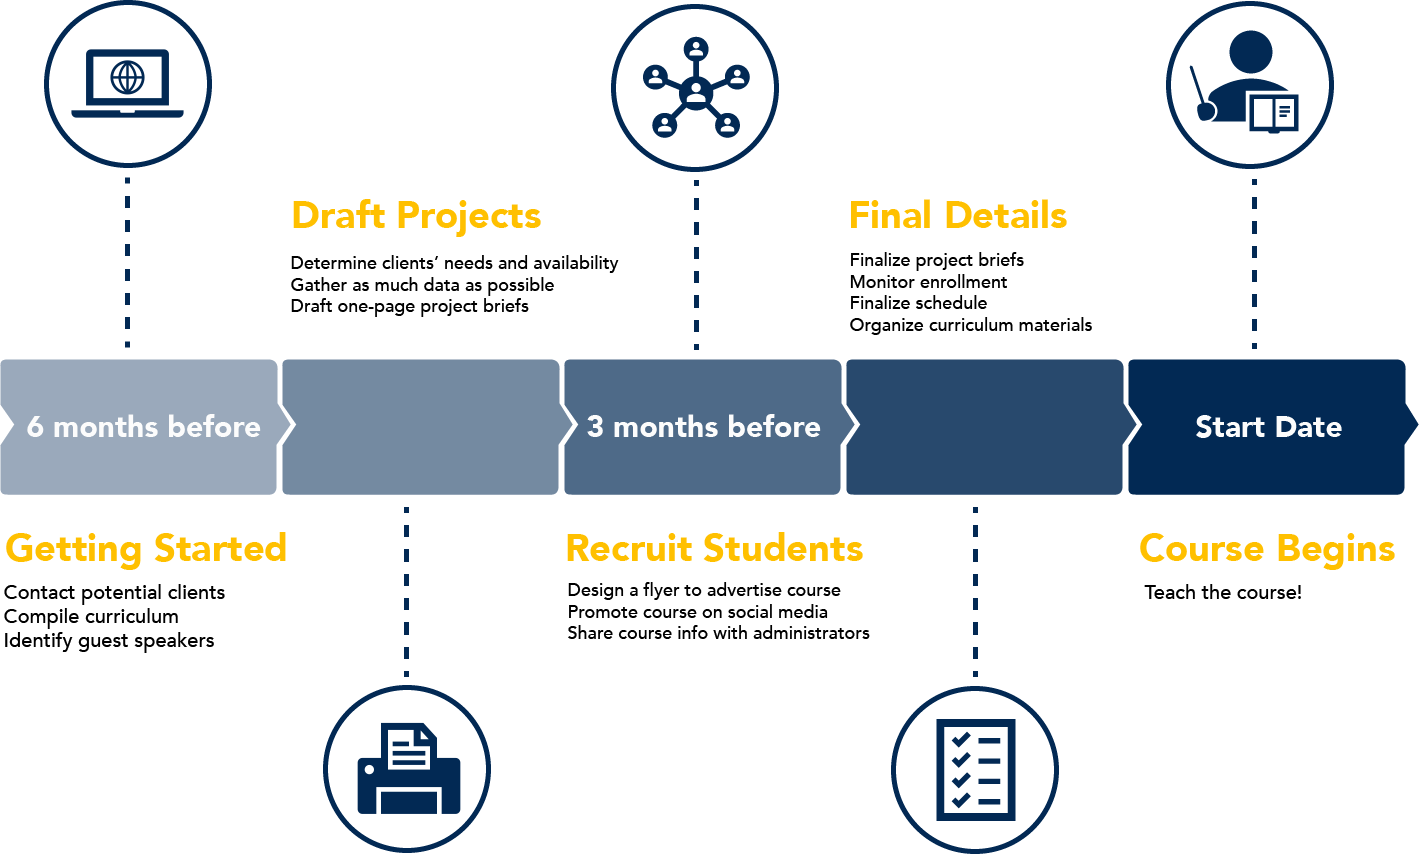 Timeline graphic illustrating the different phases of setting up the course, including identifying clients, drafting projects, and recruiting students